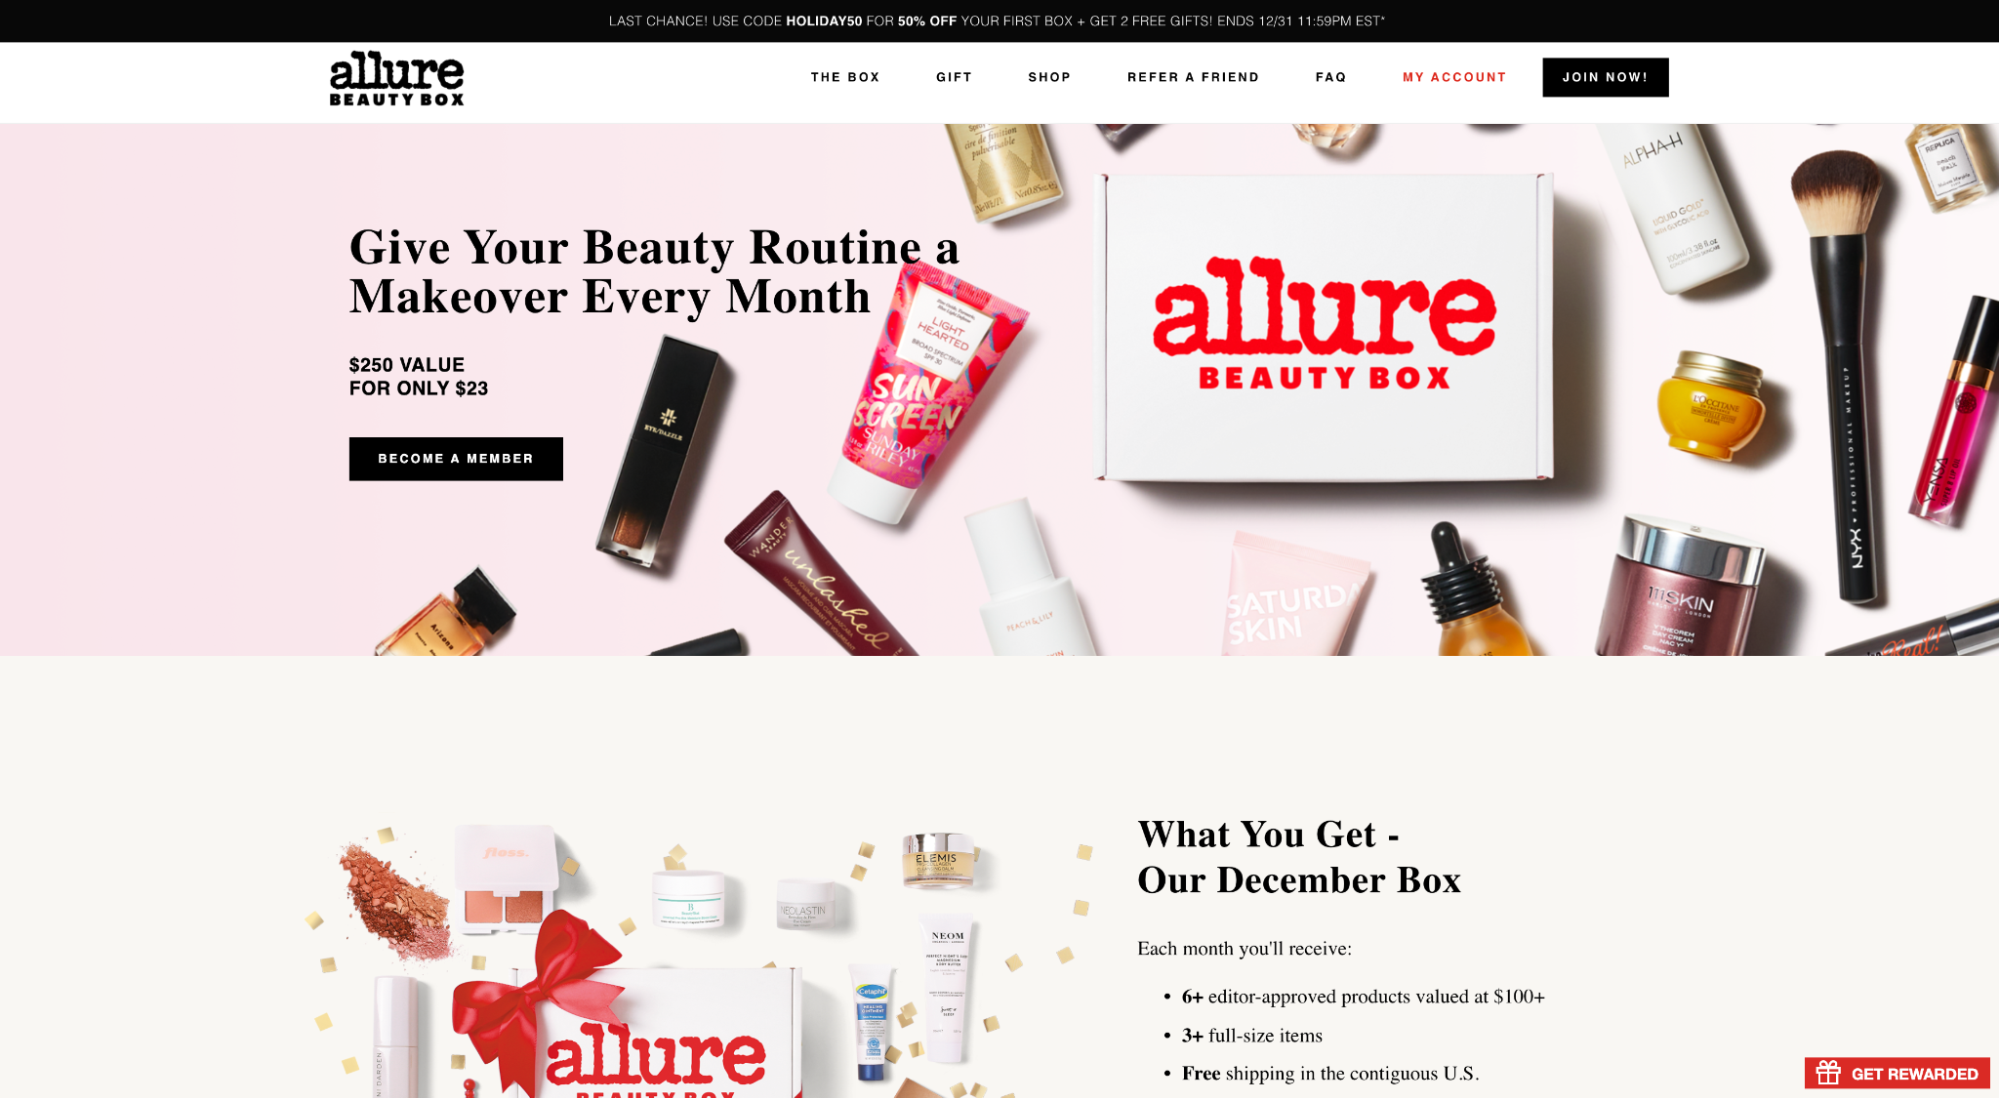 Allure Beauty Box click-through page